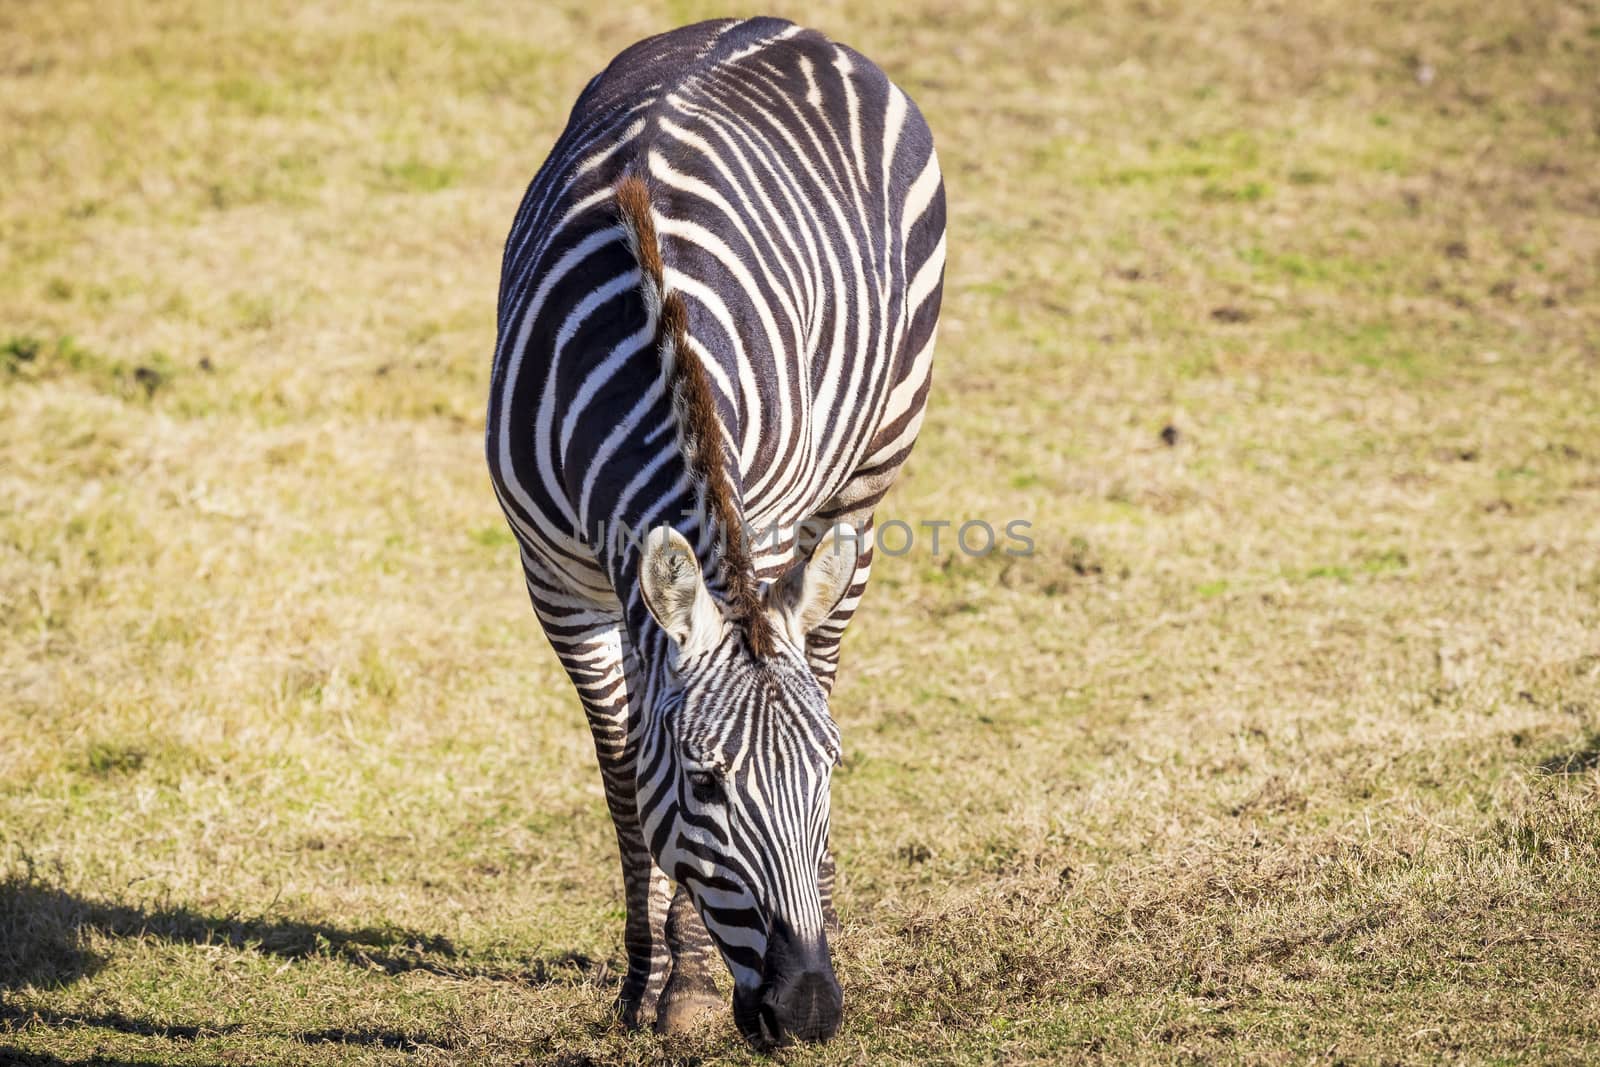 A black and white Zebra eating green grass in an open field